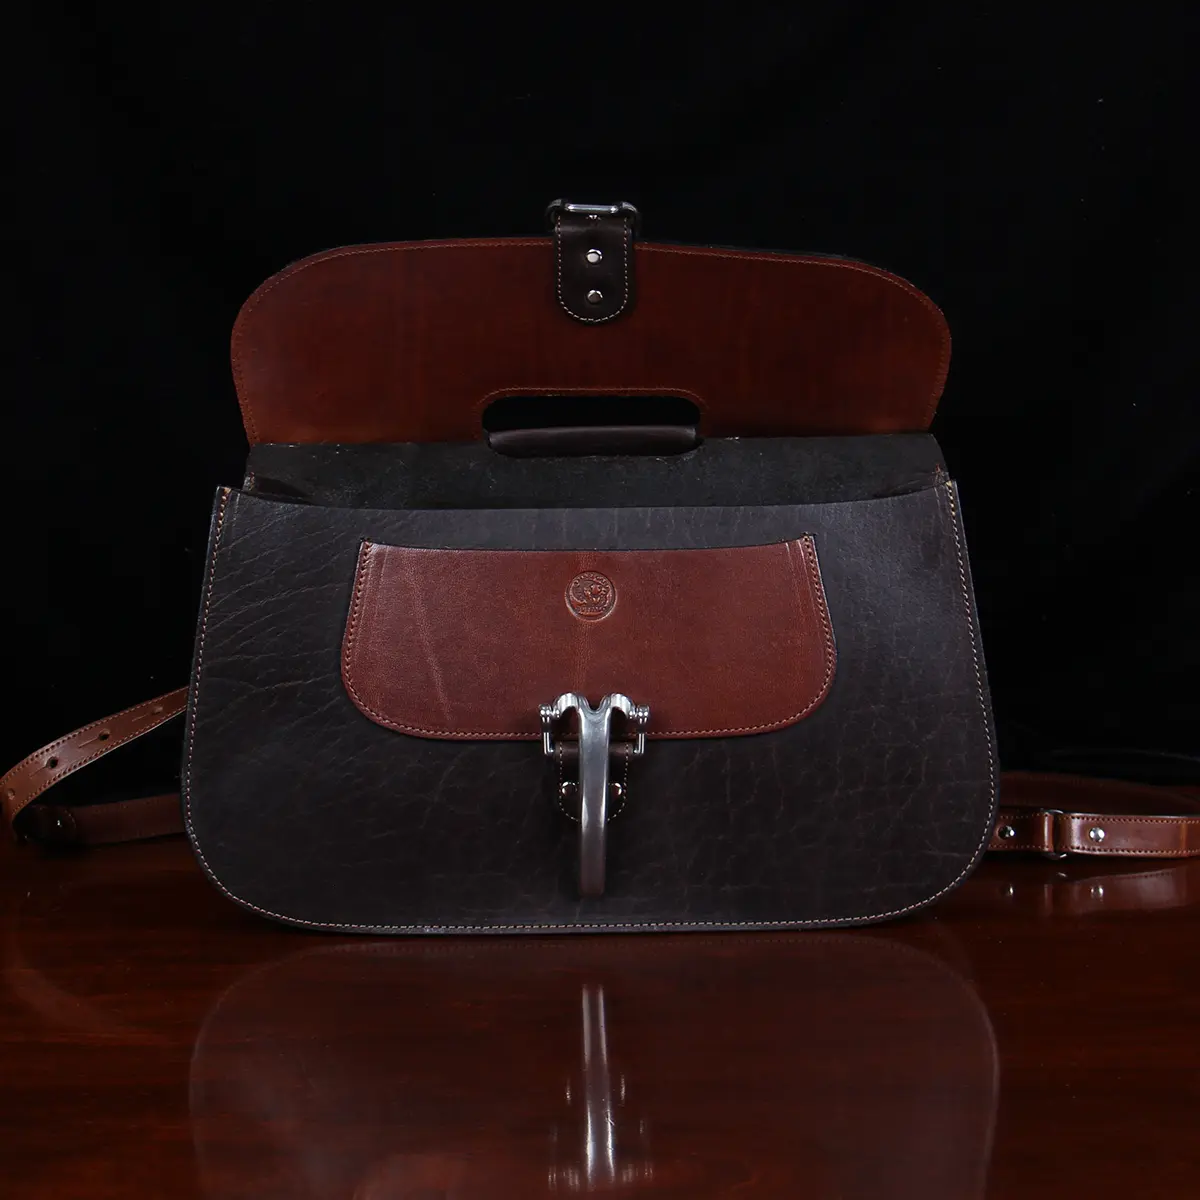 no 18 leather huntbag in tobacco buffalo - front open view - on a wood table with dark background